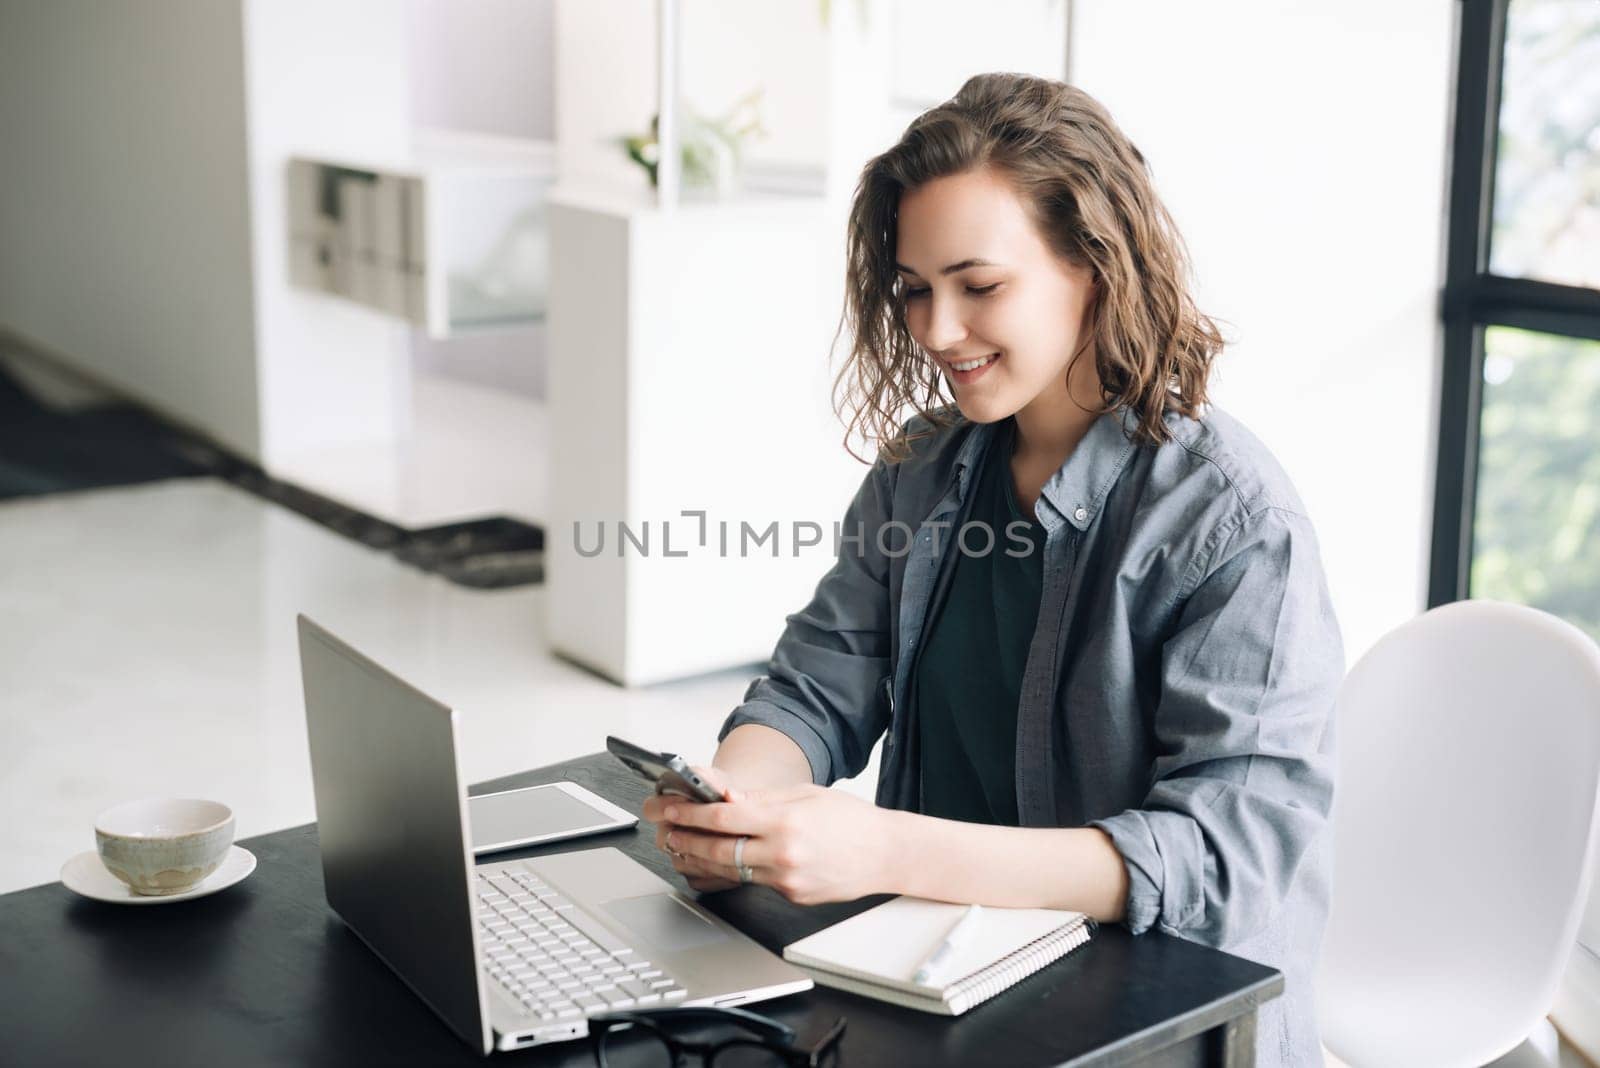 Young Woman Embracing the Modern Work Environment: Using Laptop Computer and Mobile Phone at Office. Student Girl Engaged in Productive Work from Home. Freelancing, Business, E-Learning, by ViShark